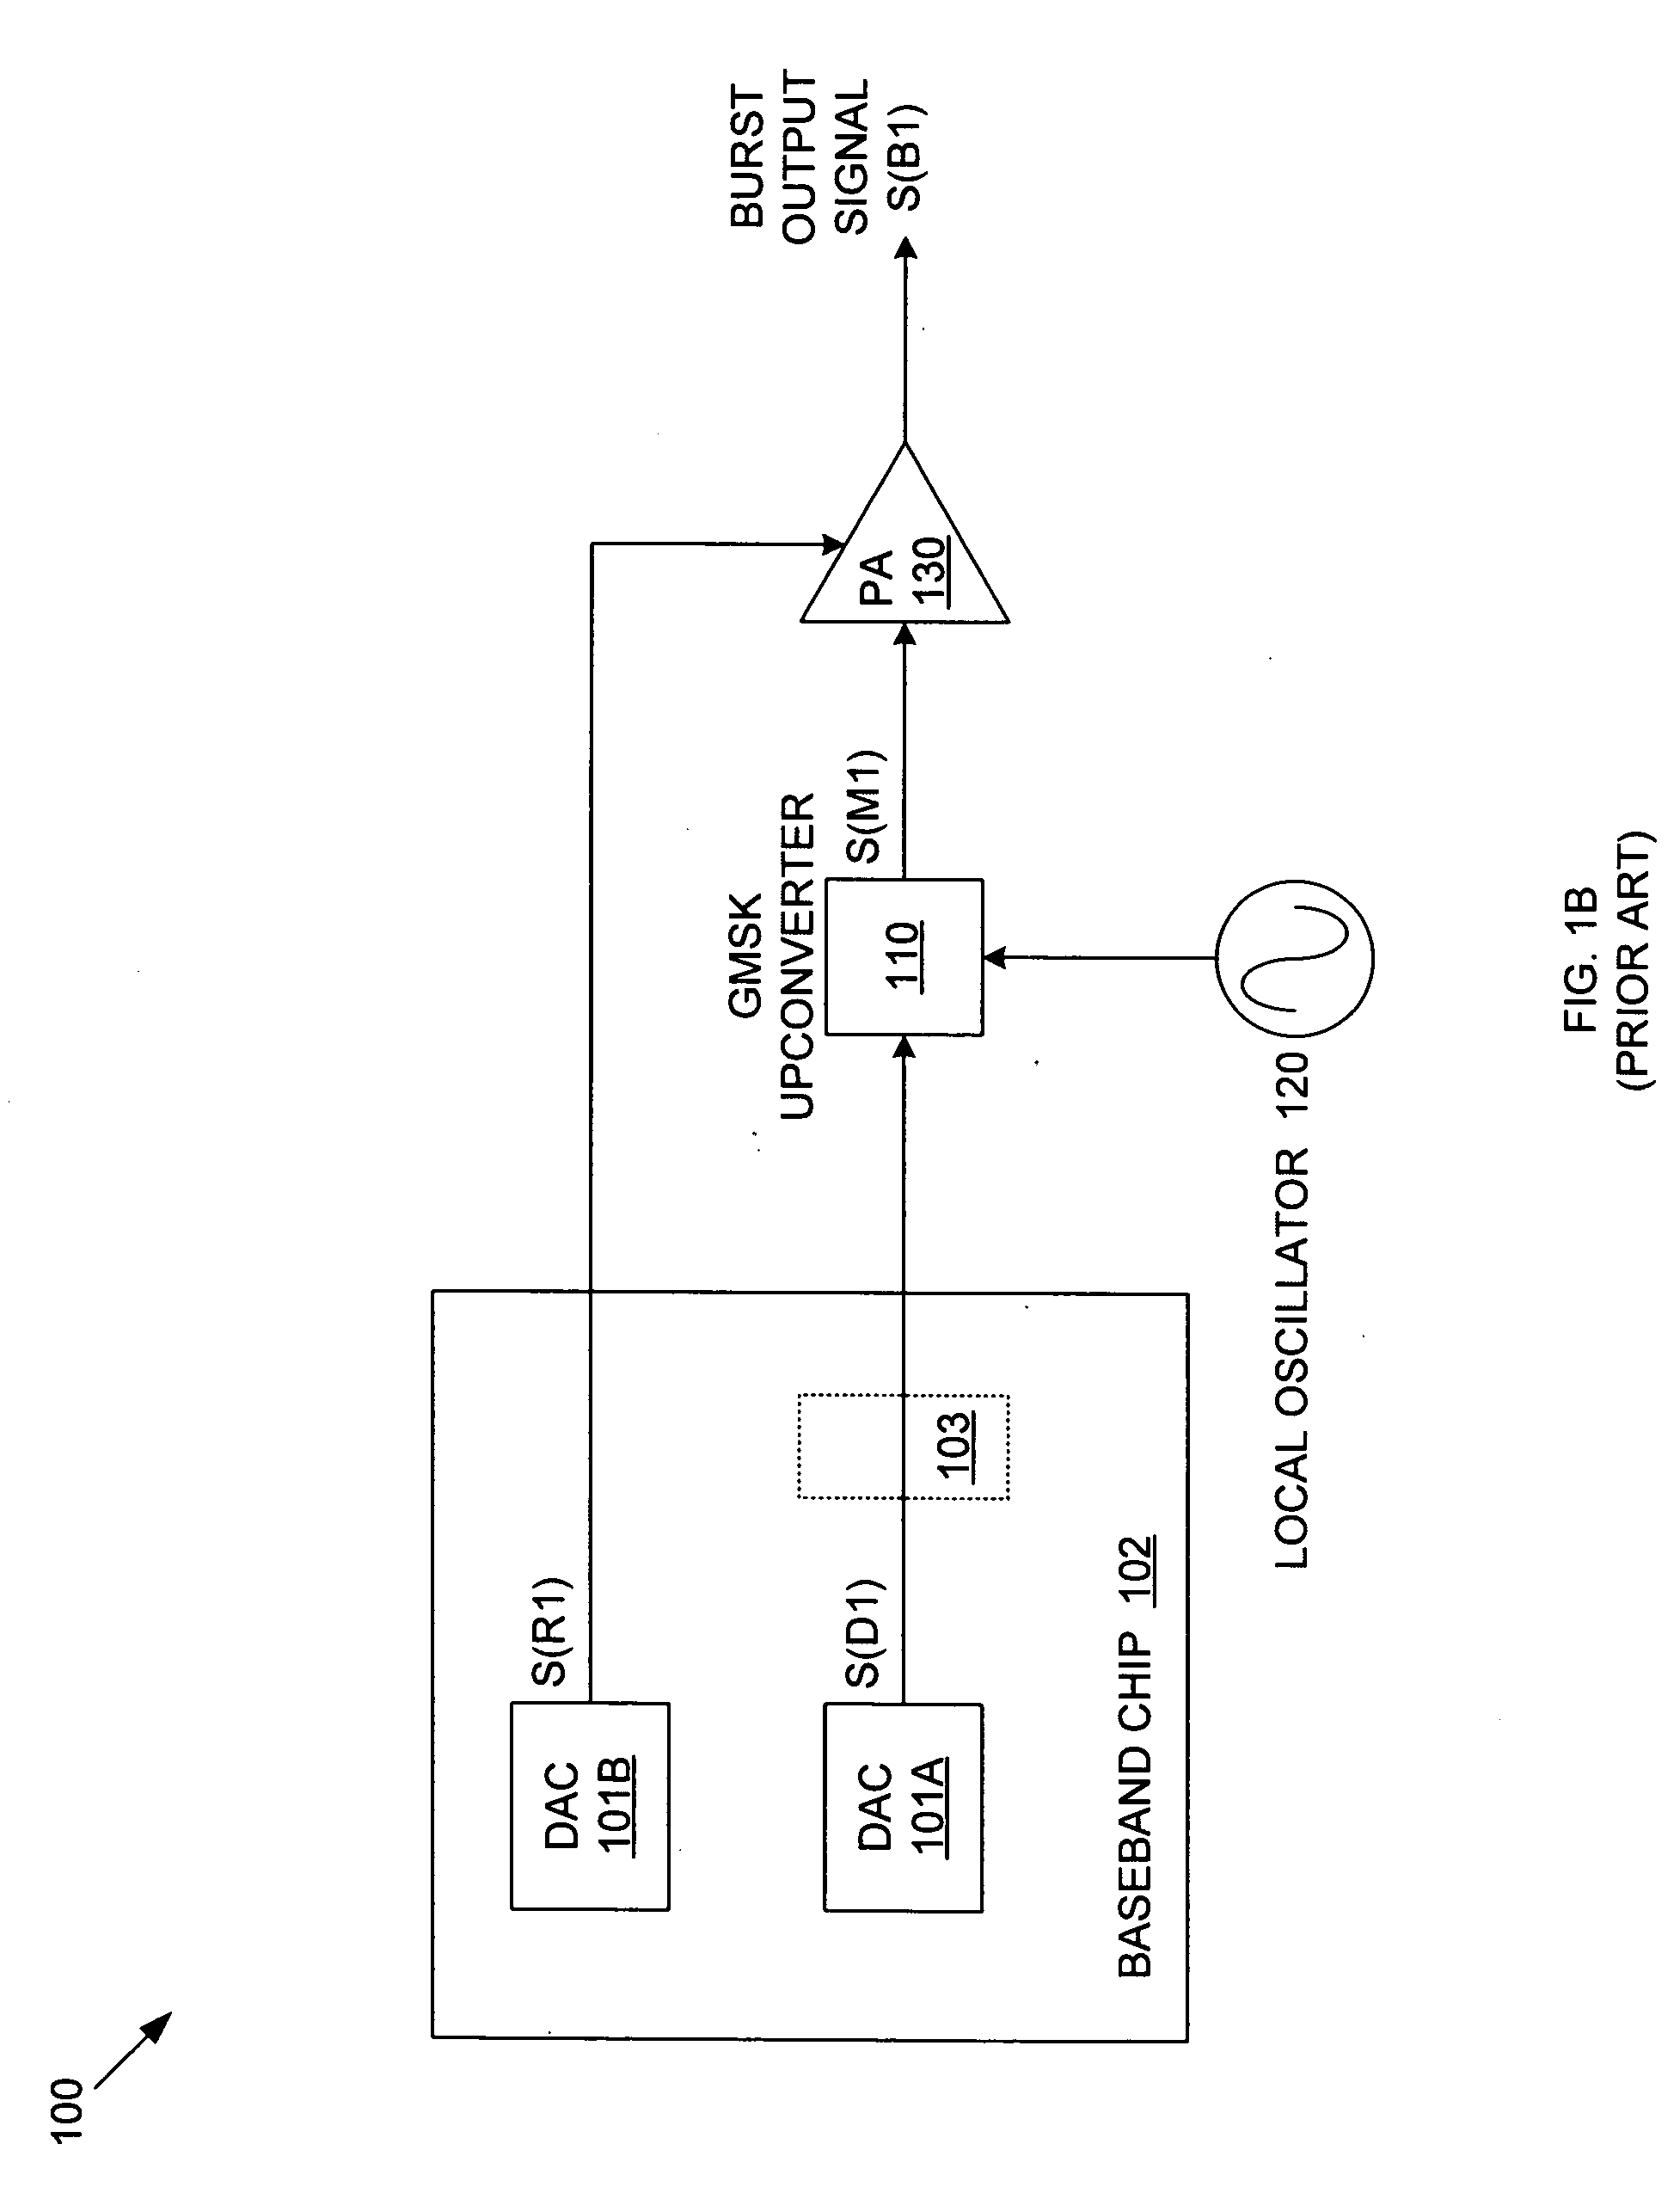 Method and architecture for dual-mode linear and saturated power amplifier operation